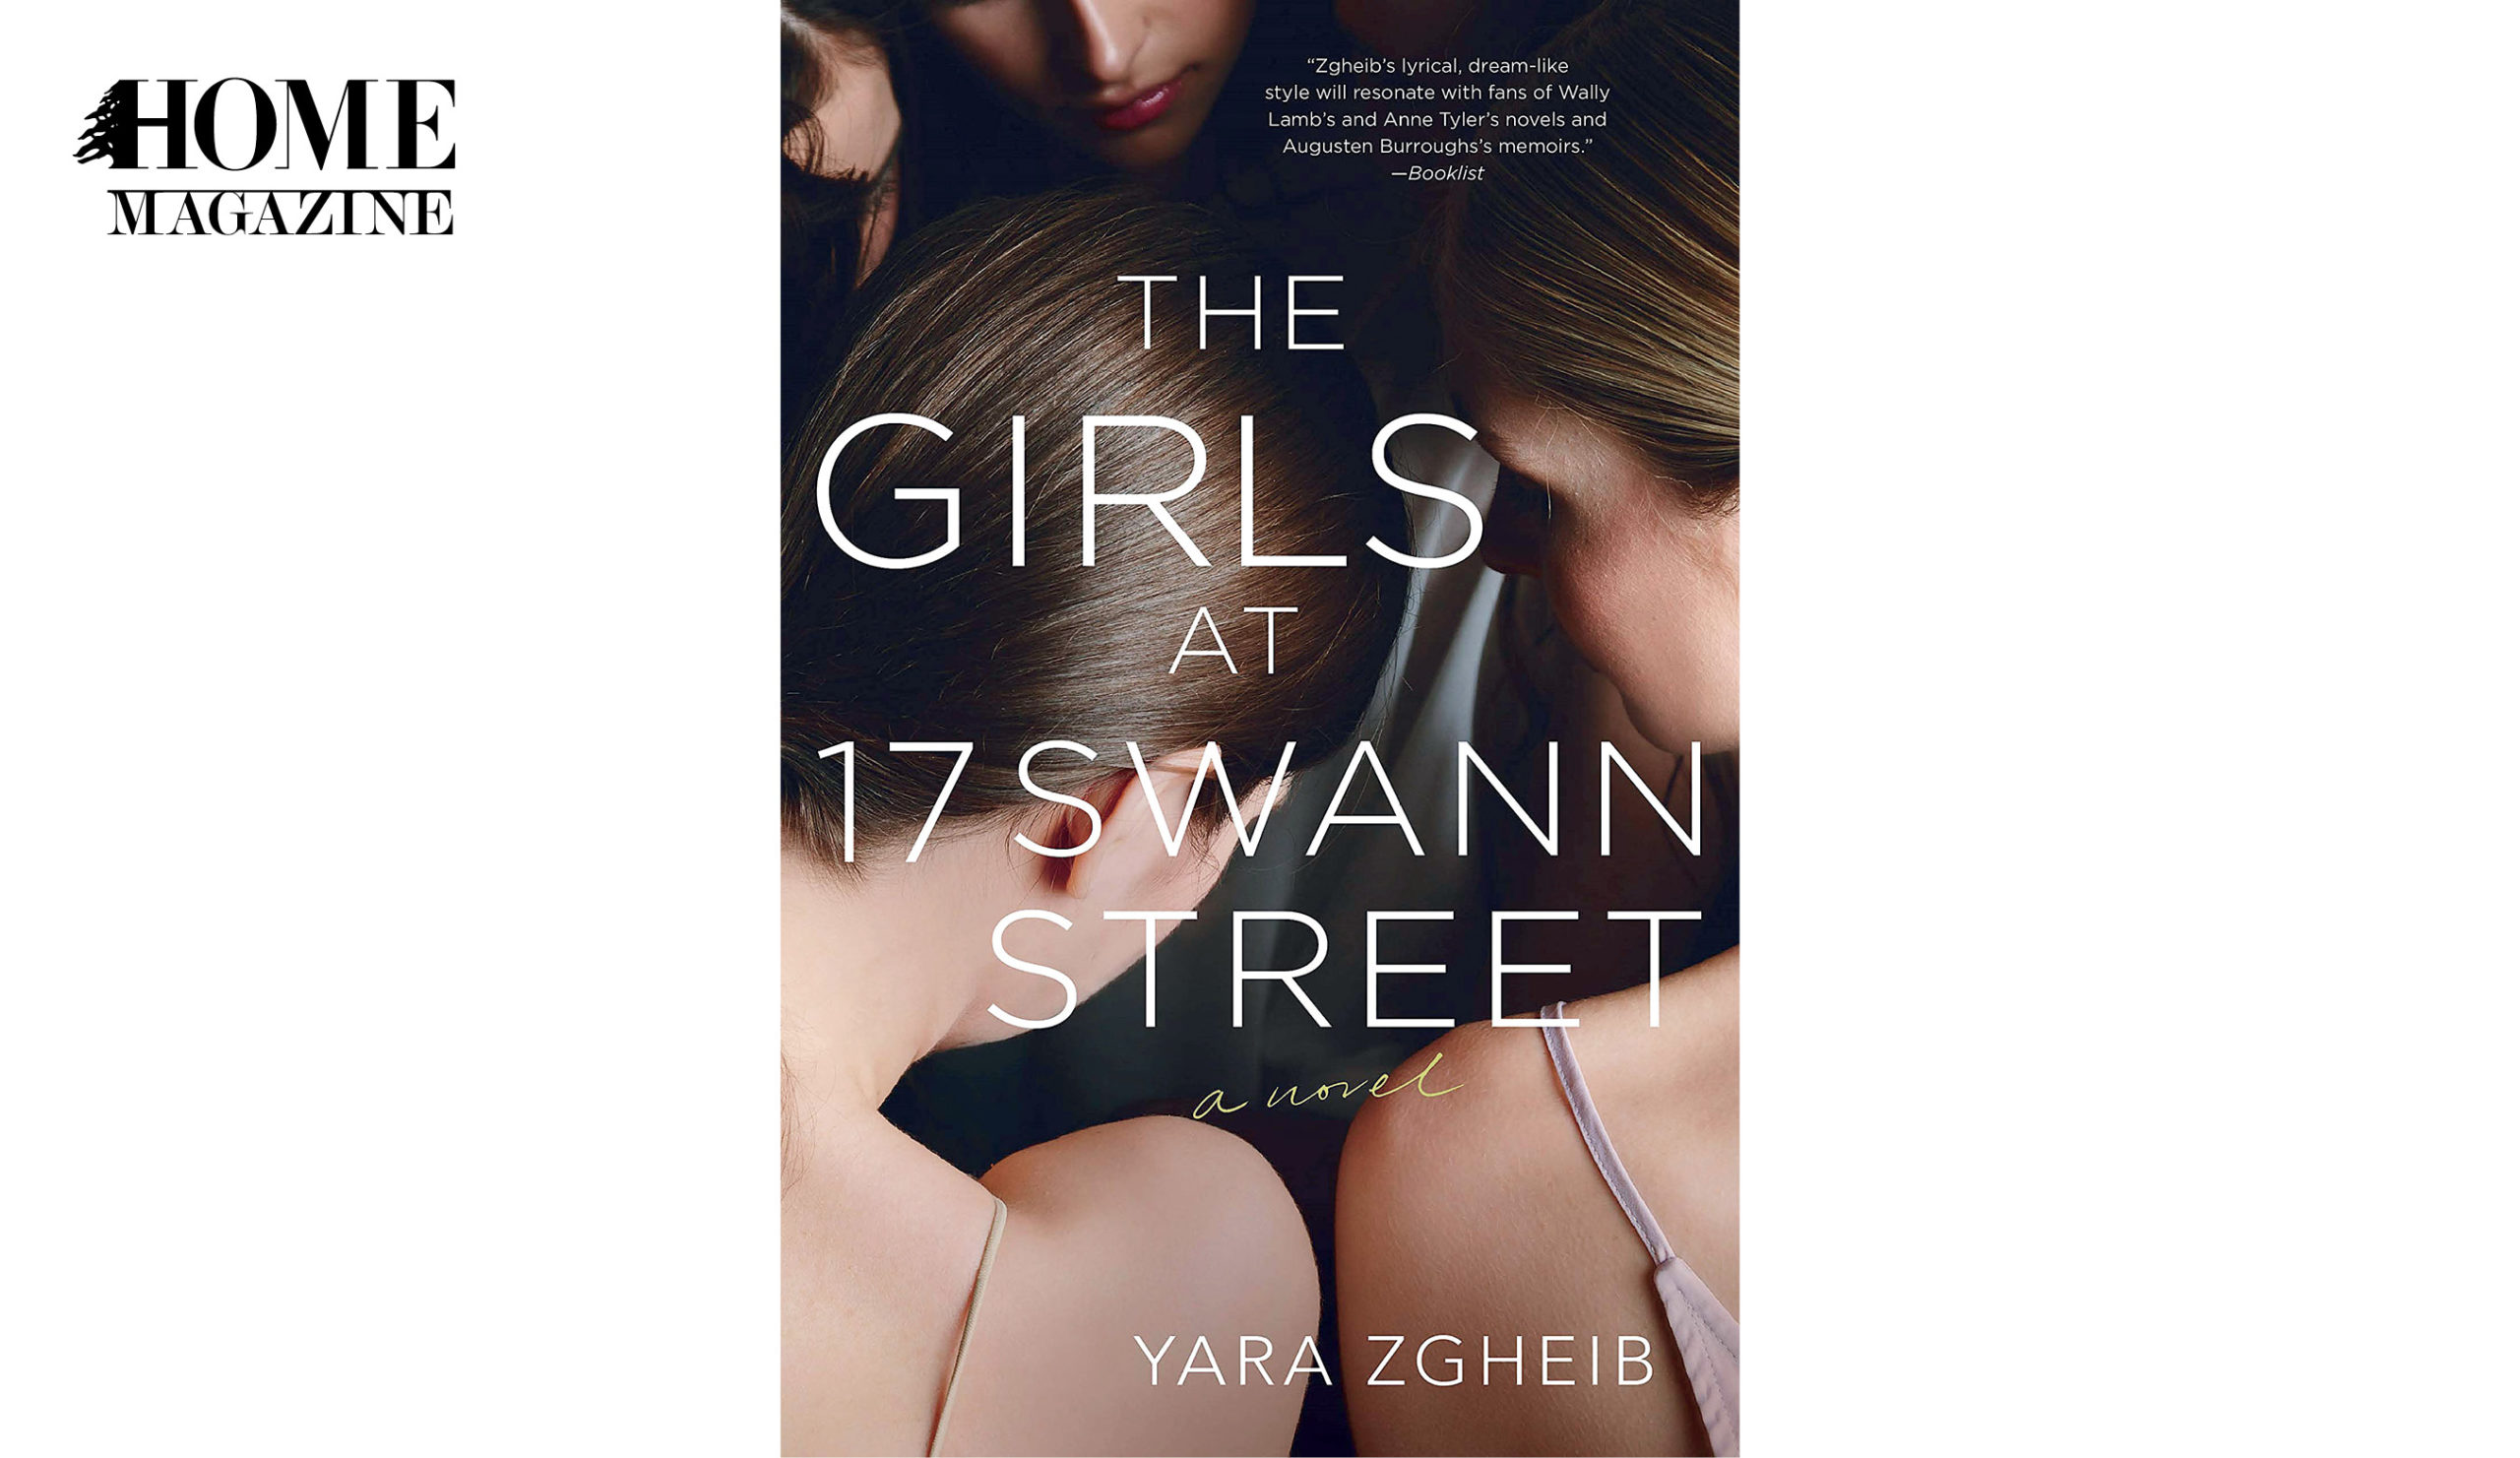 Booked cover titled The Girls at 17 Swann Street with background image of 2 girls